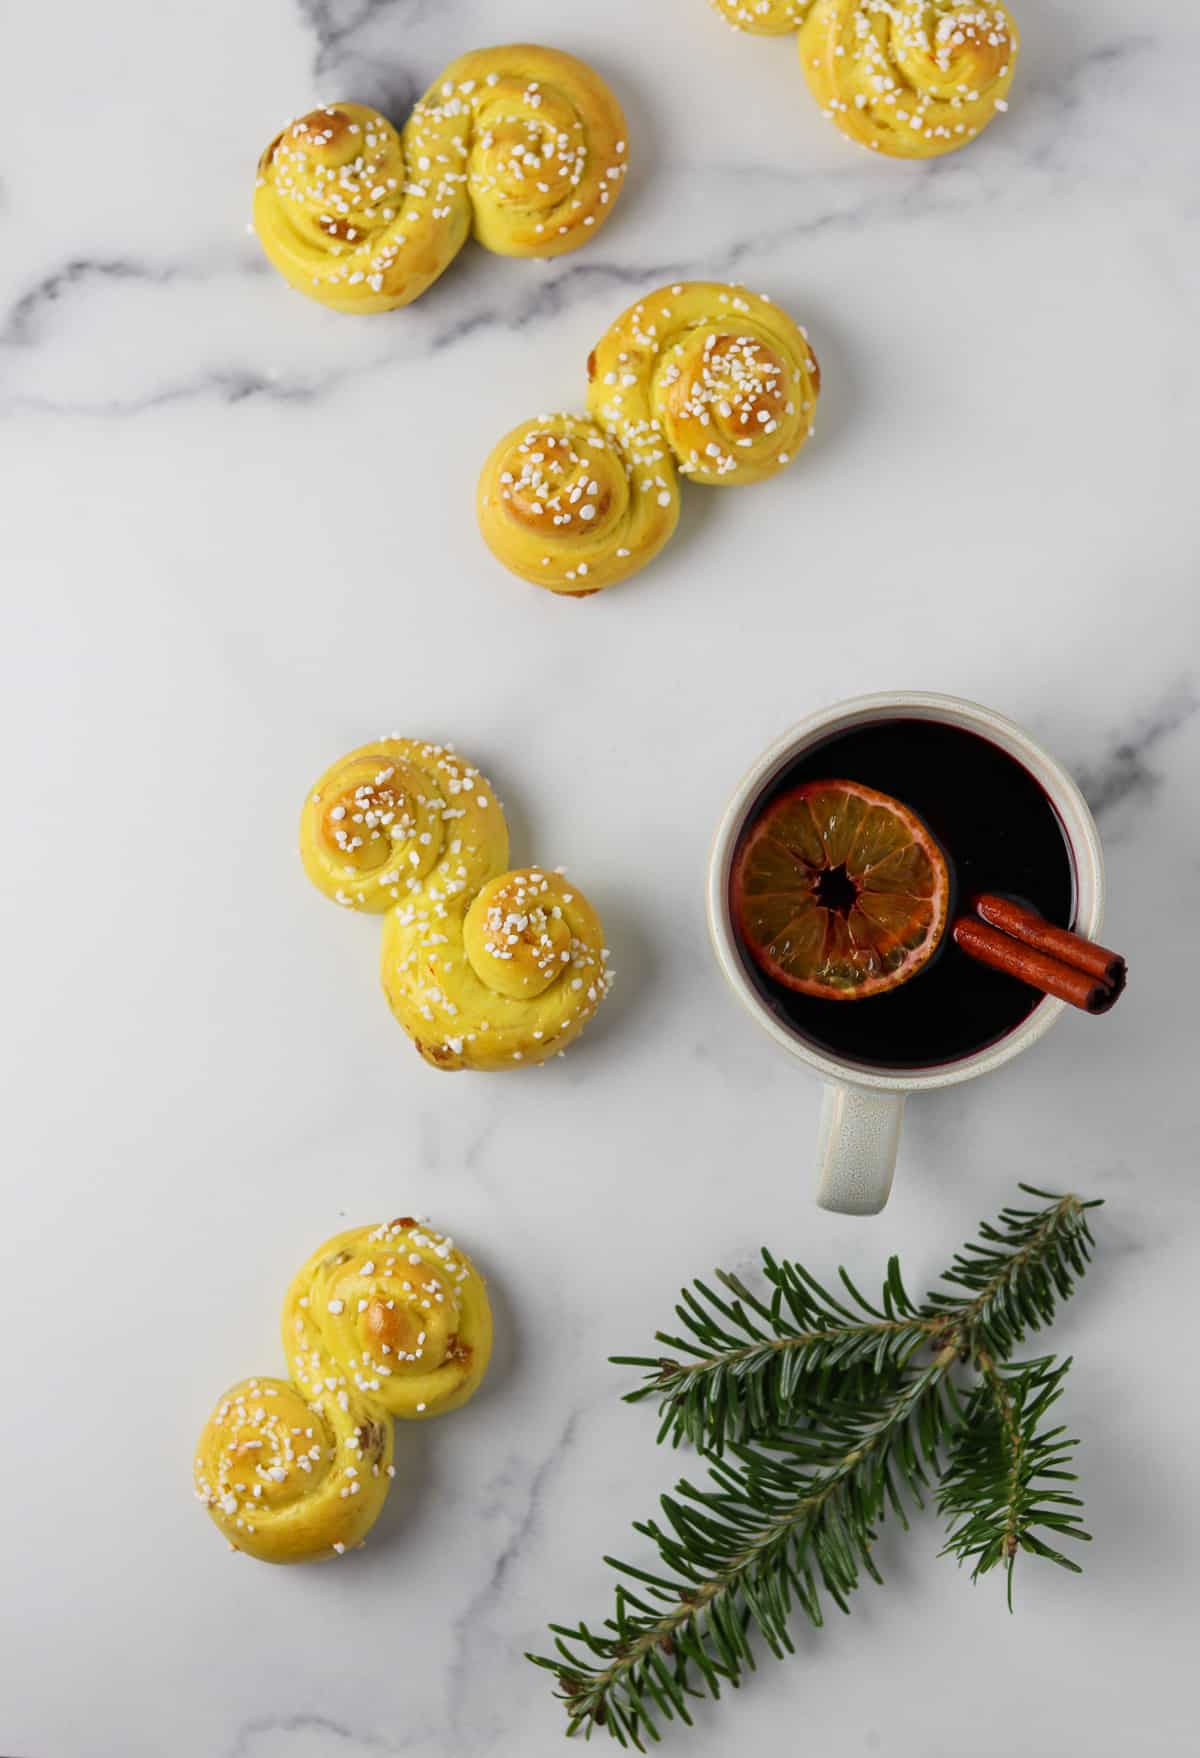 St. Lucia Buns on a marble surface next to a mug of mulled wine and a pine branch.